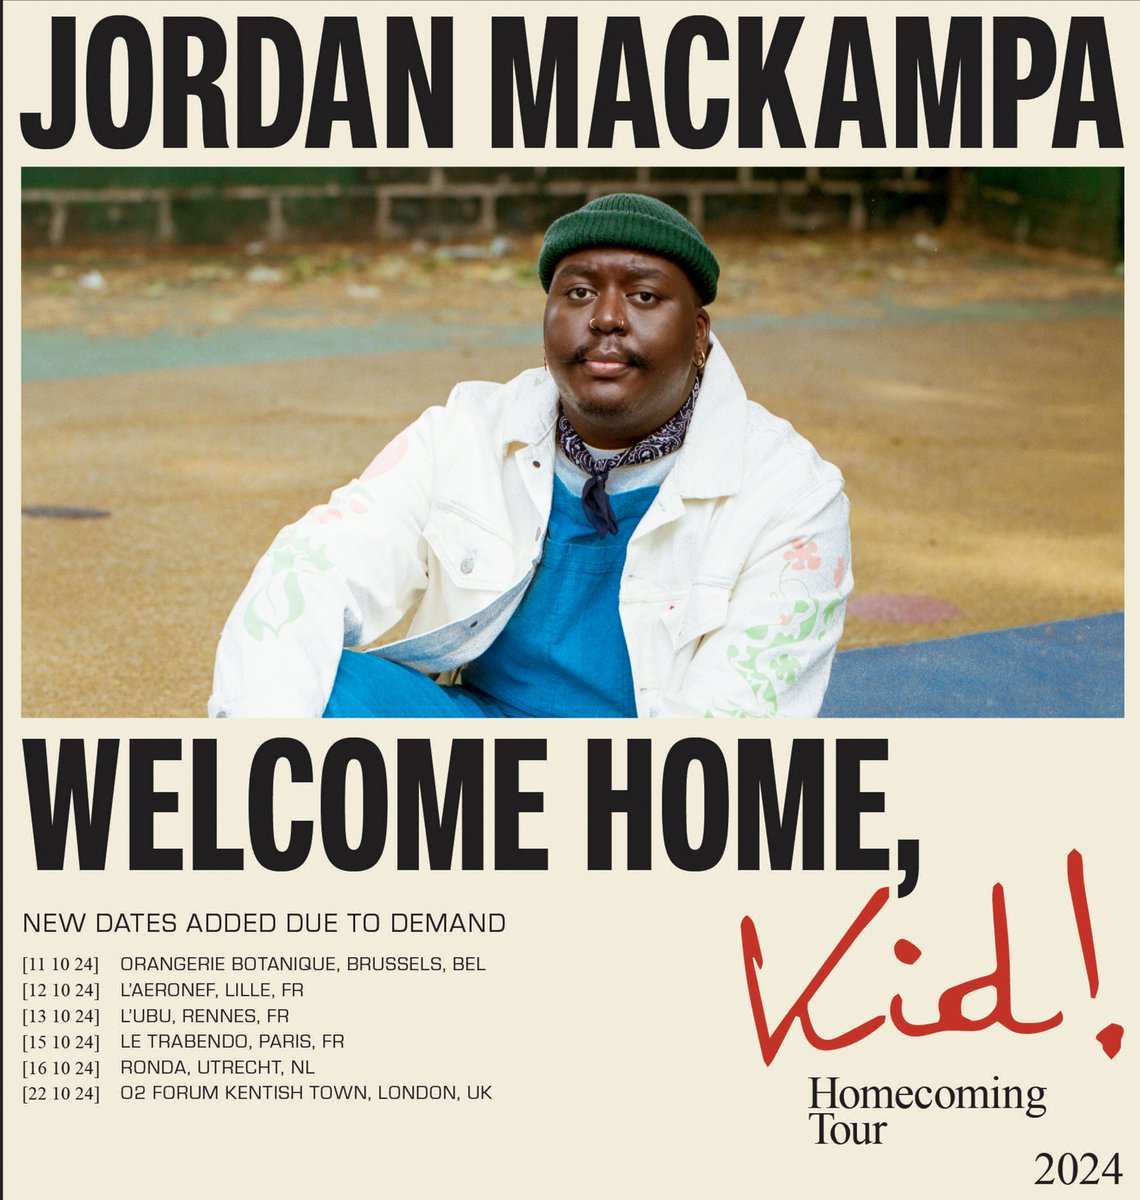 Just Announced: @JordanMackampa new EU dates due to high demand! Tickets are on sale now!